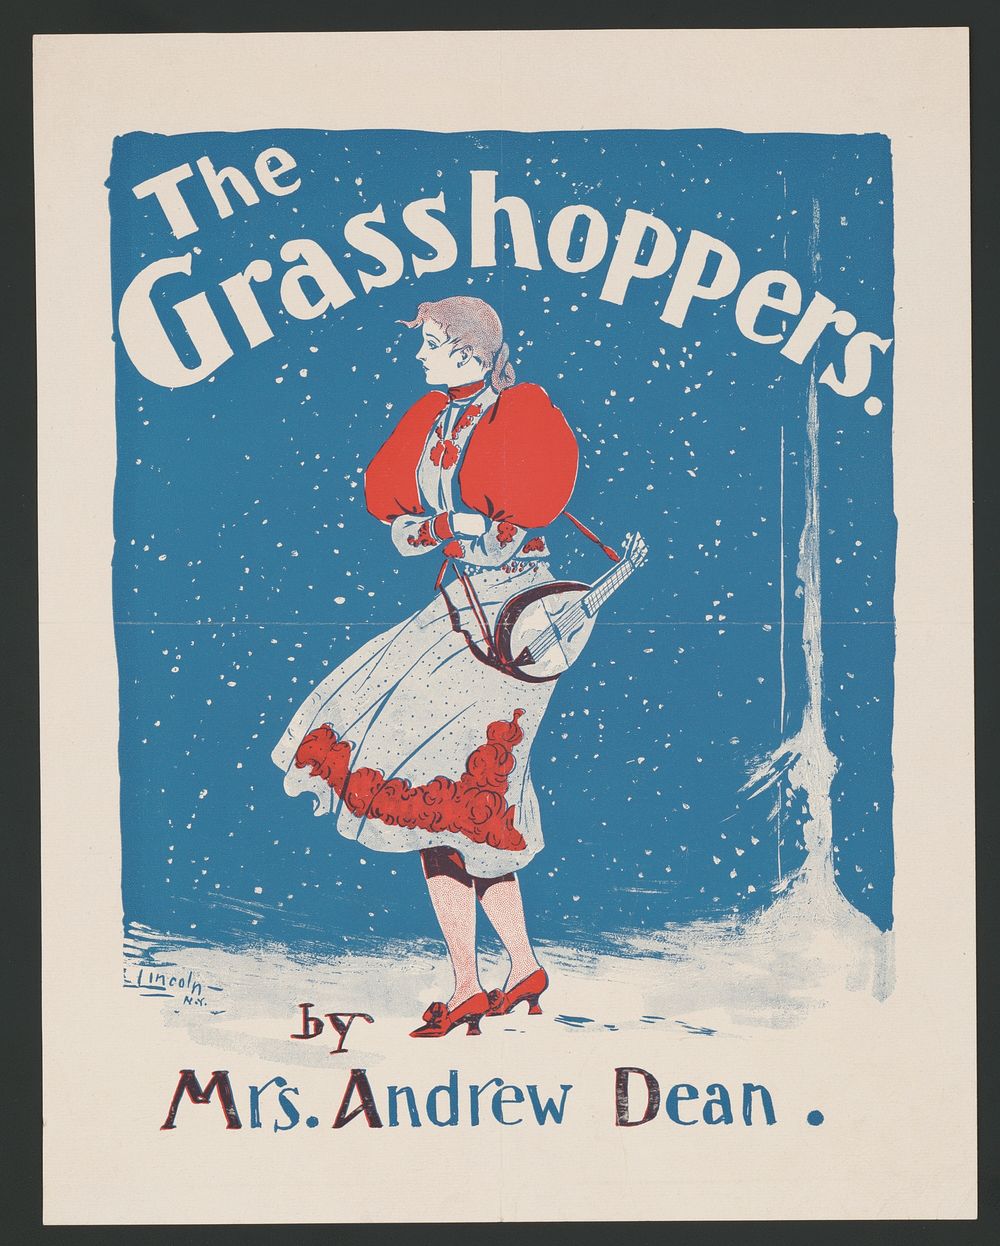 The grasshoppers by Mrs. Andrew Dean